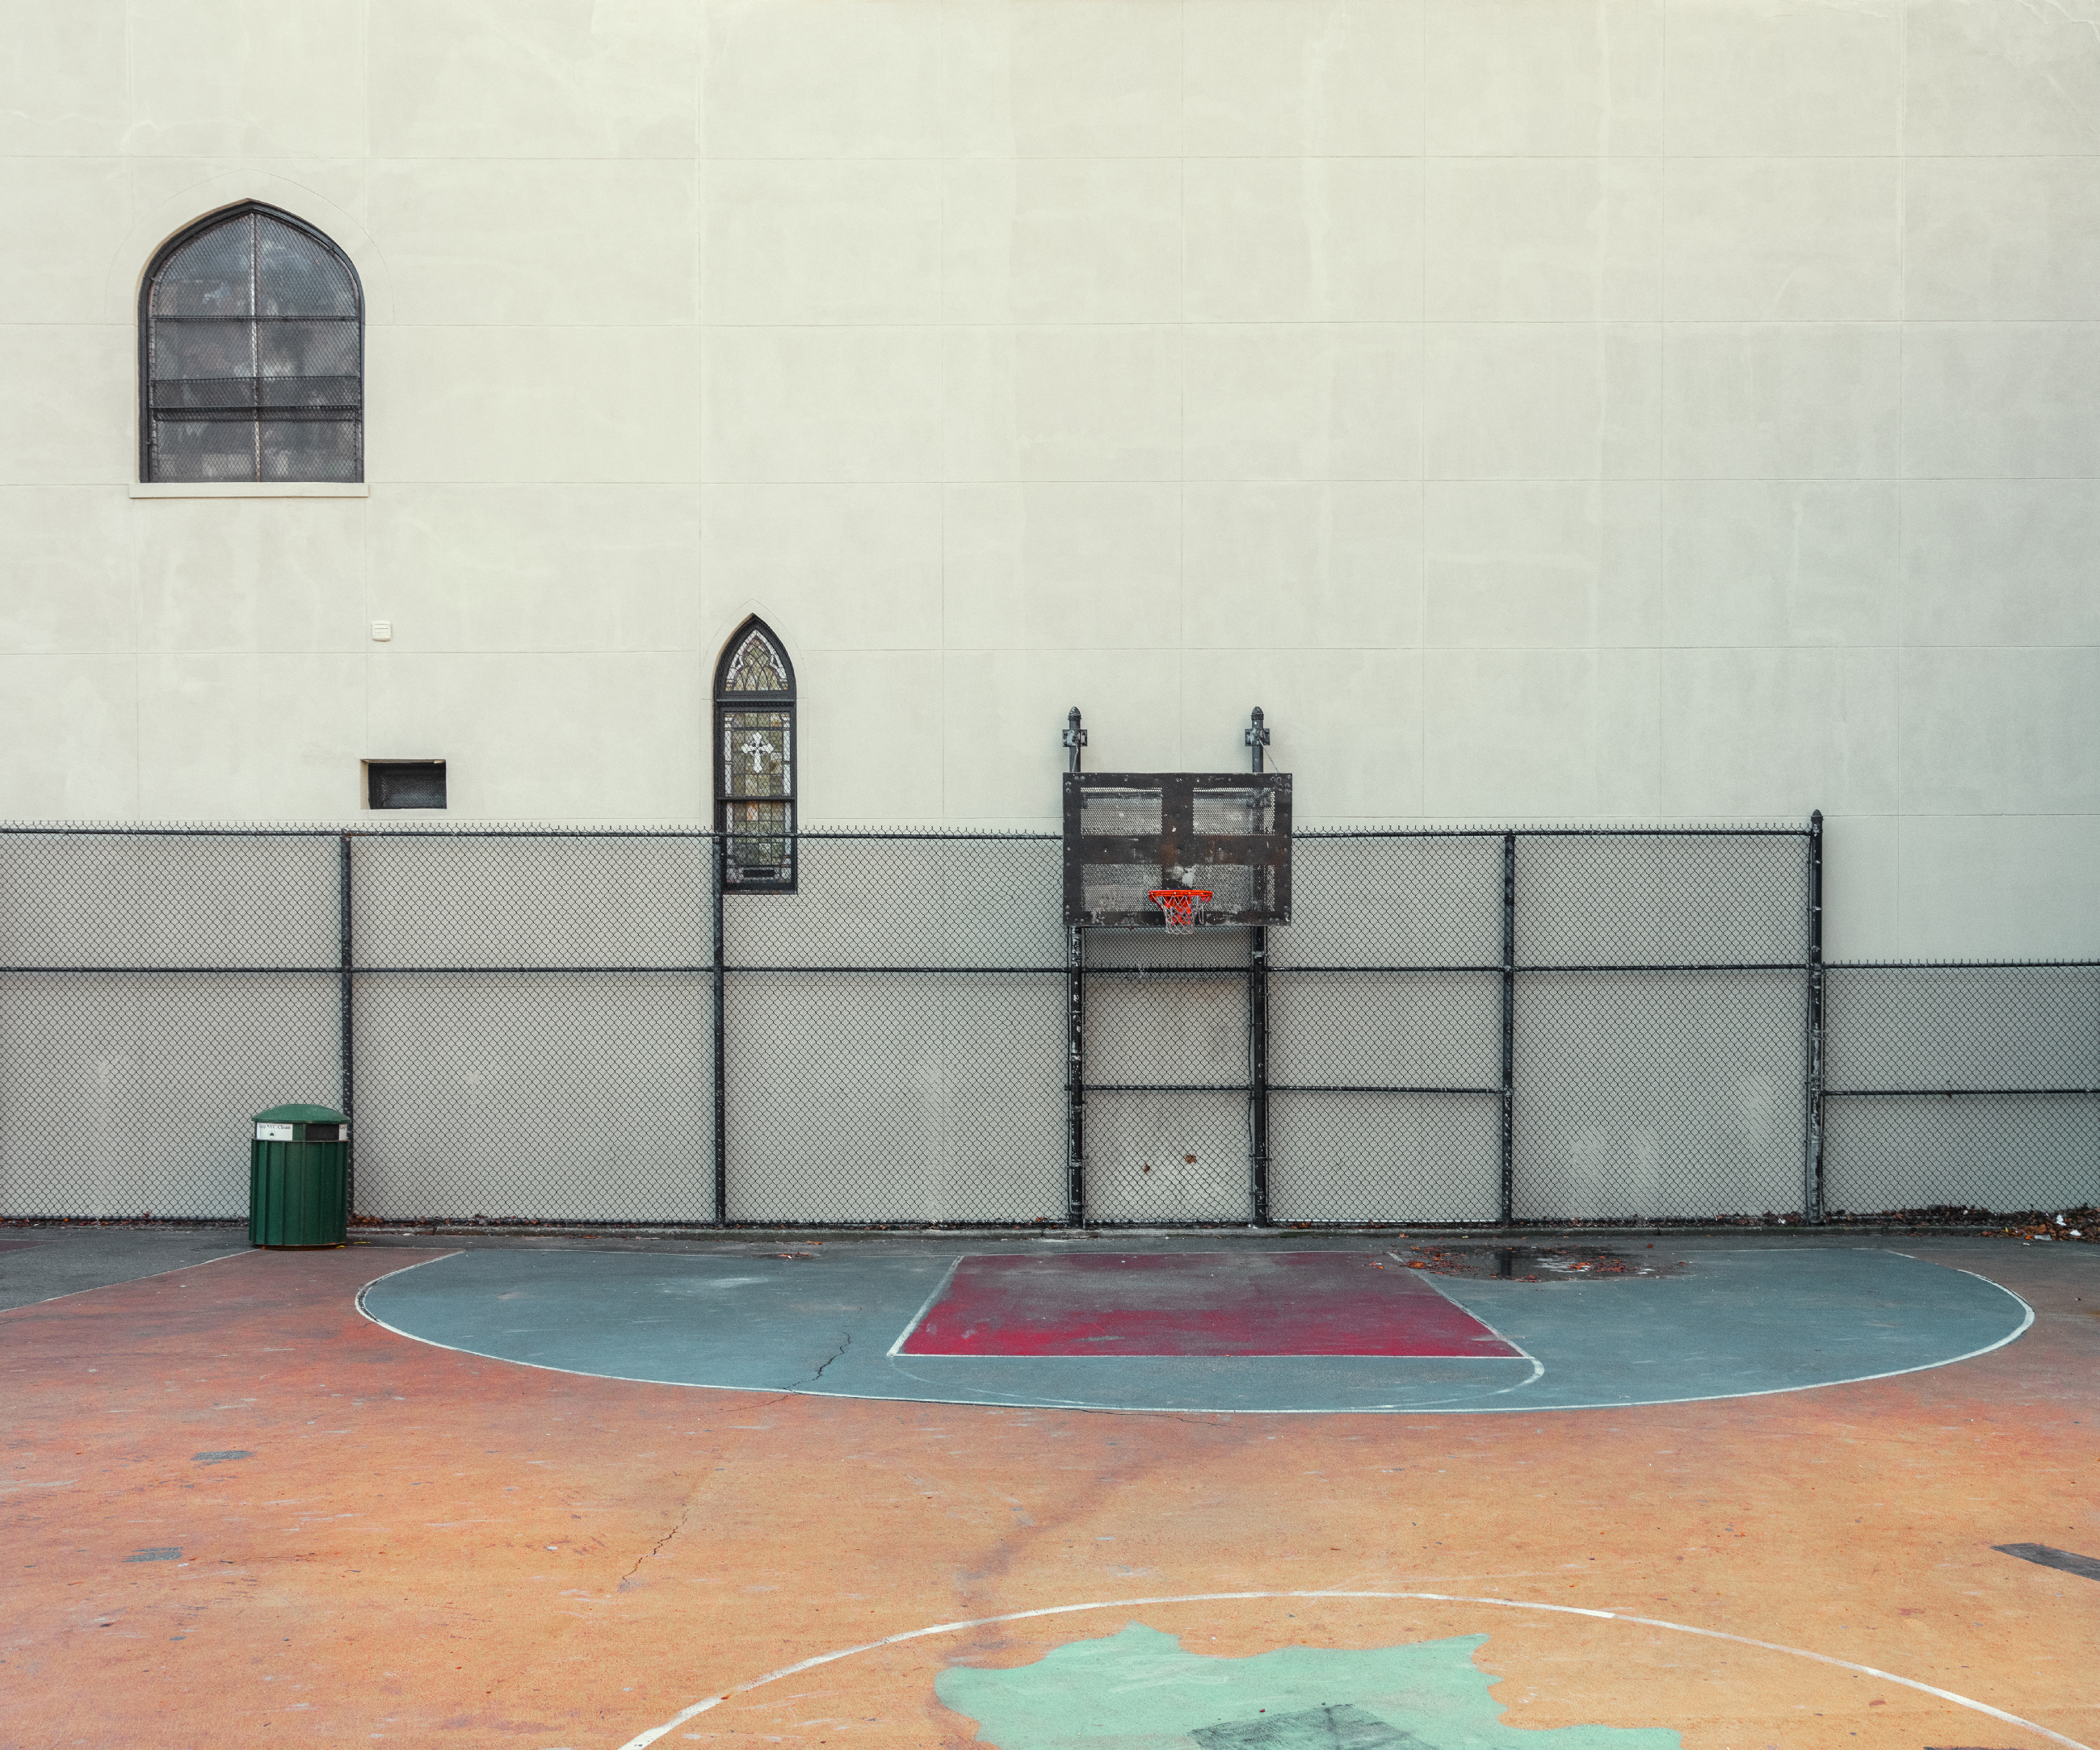 ludwig-favre-ny-basketball-courts-04